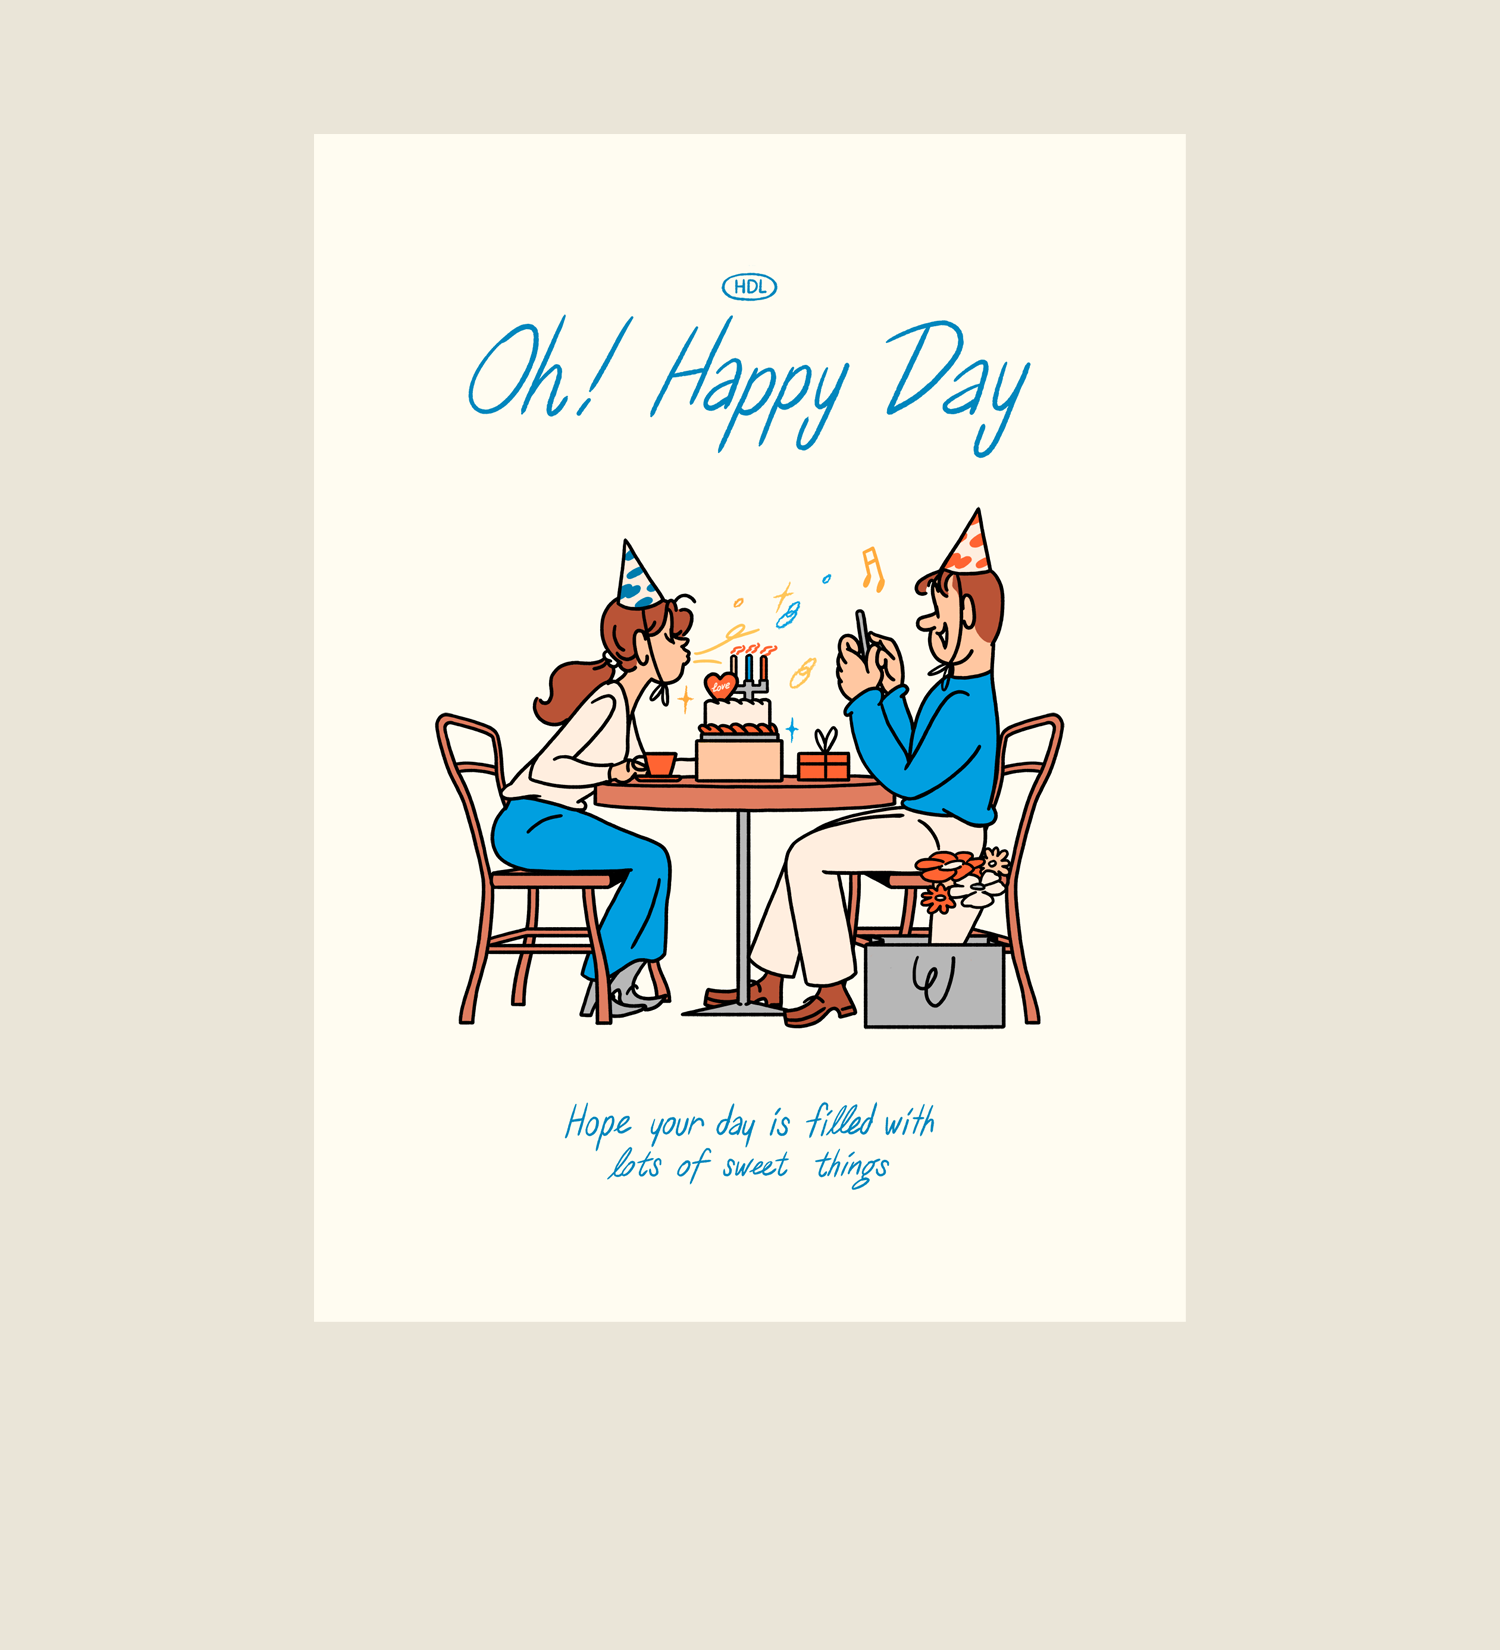 [POSTCARD] Oh! Happy Day